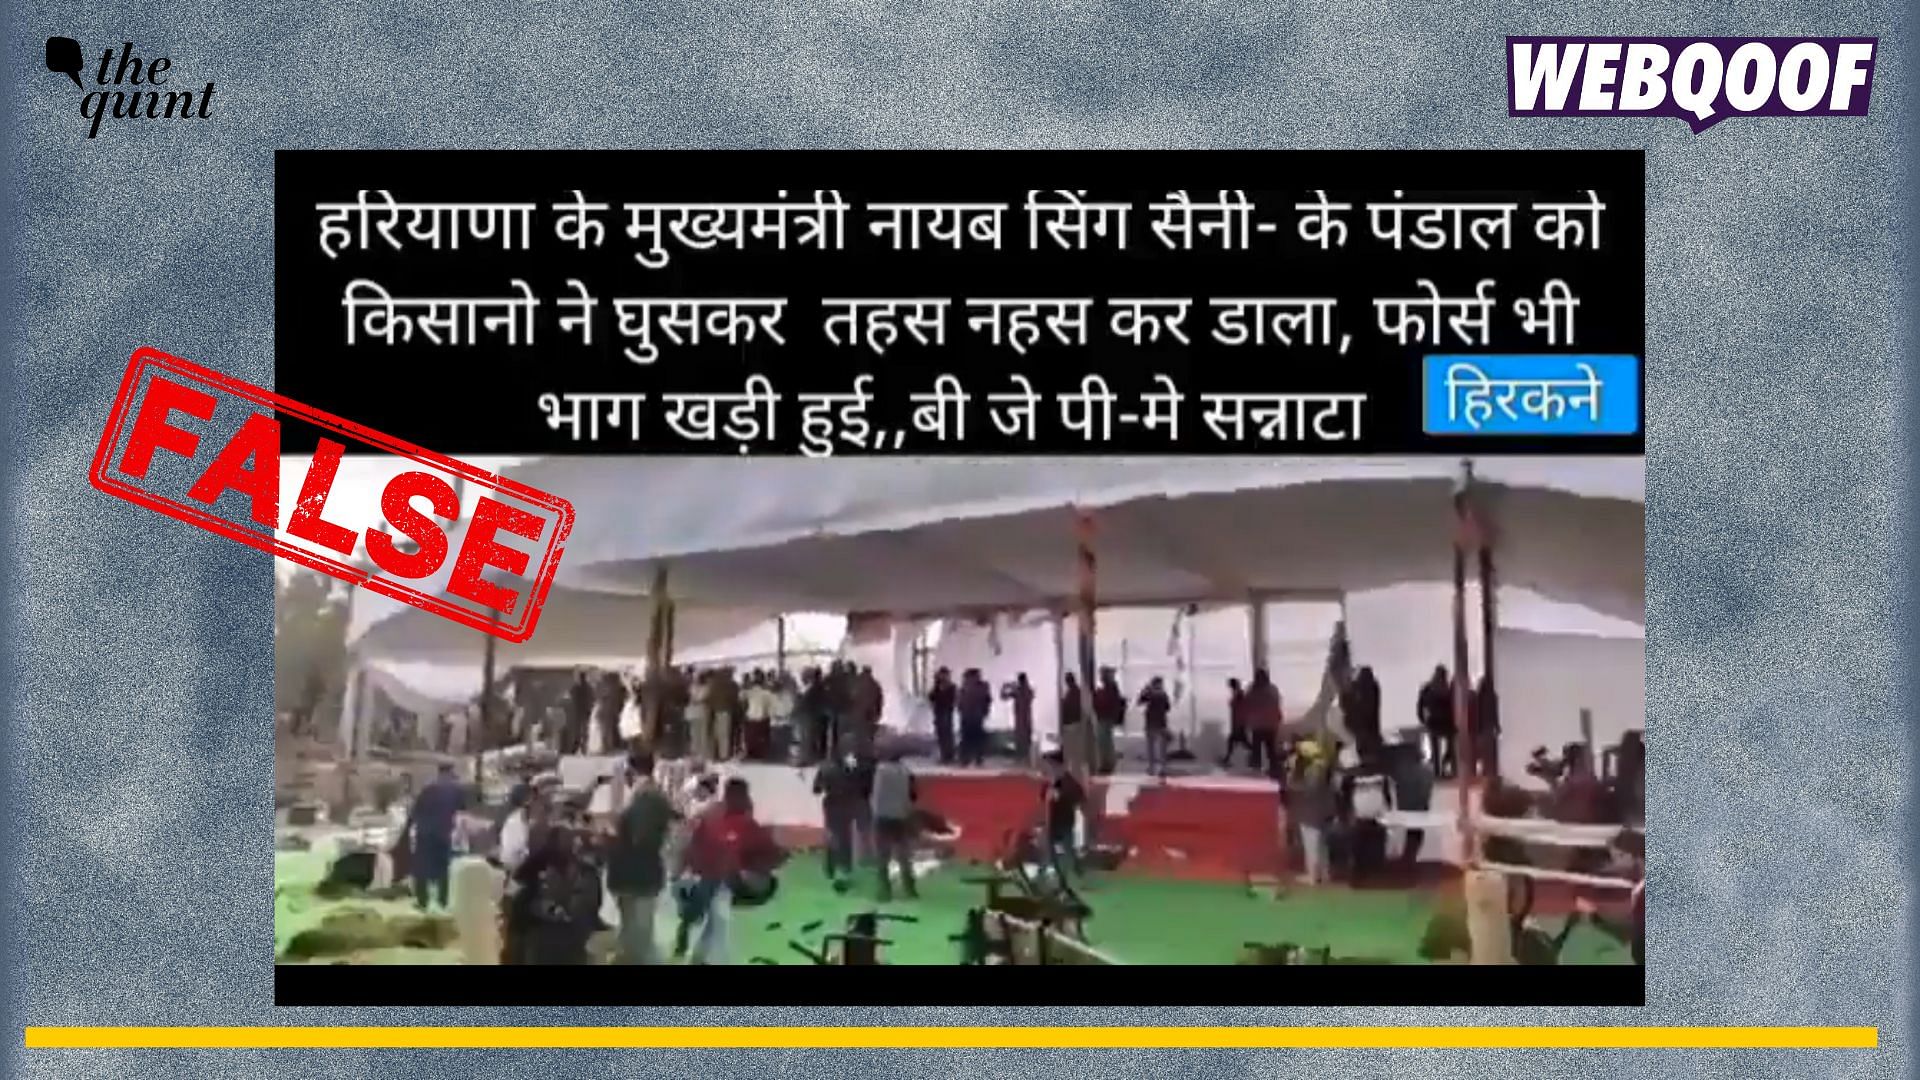 <div class="paragraphs"><p>Fact-check: A video of farmers vandalising an event organised for former Haryana CM Manohar Lal Khattar is being falsely linked with the current CM Nayab Singh Saini.</p></div>